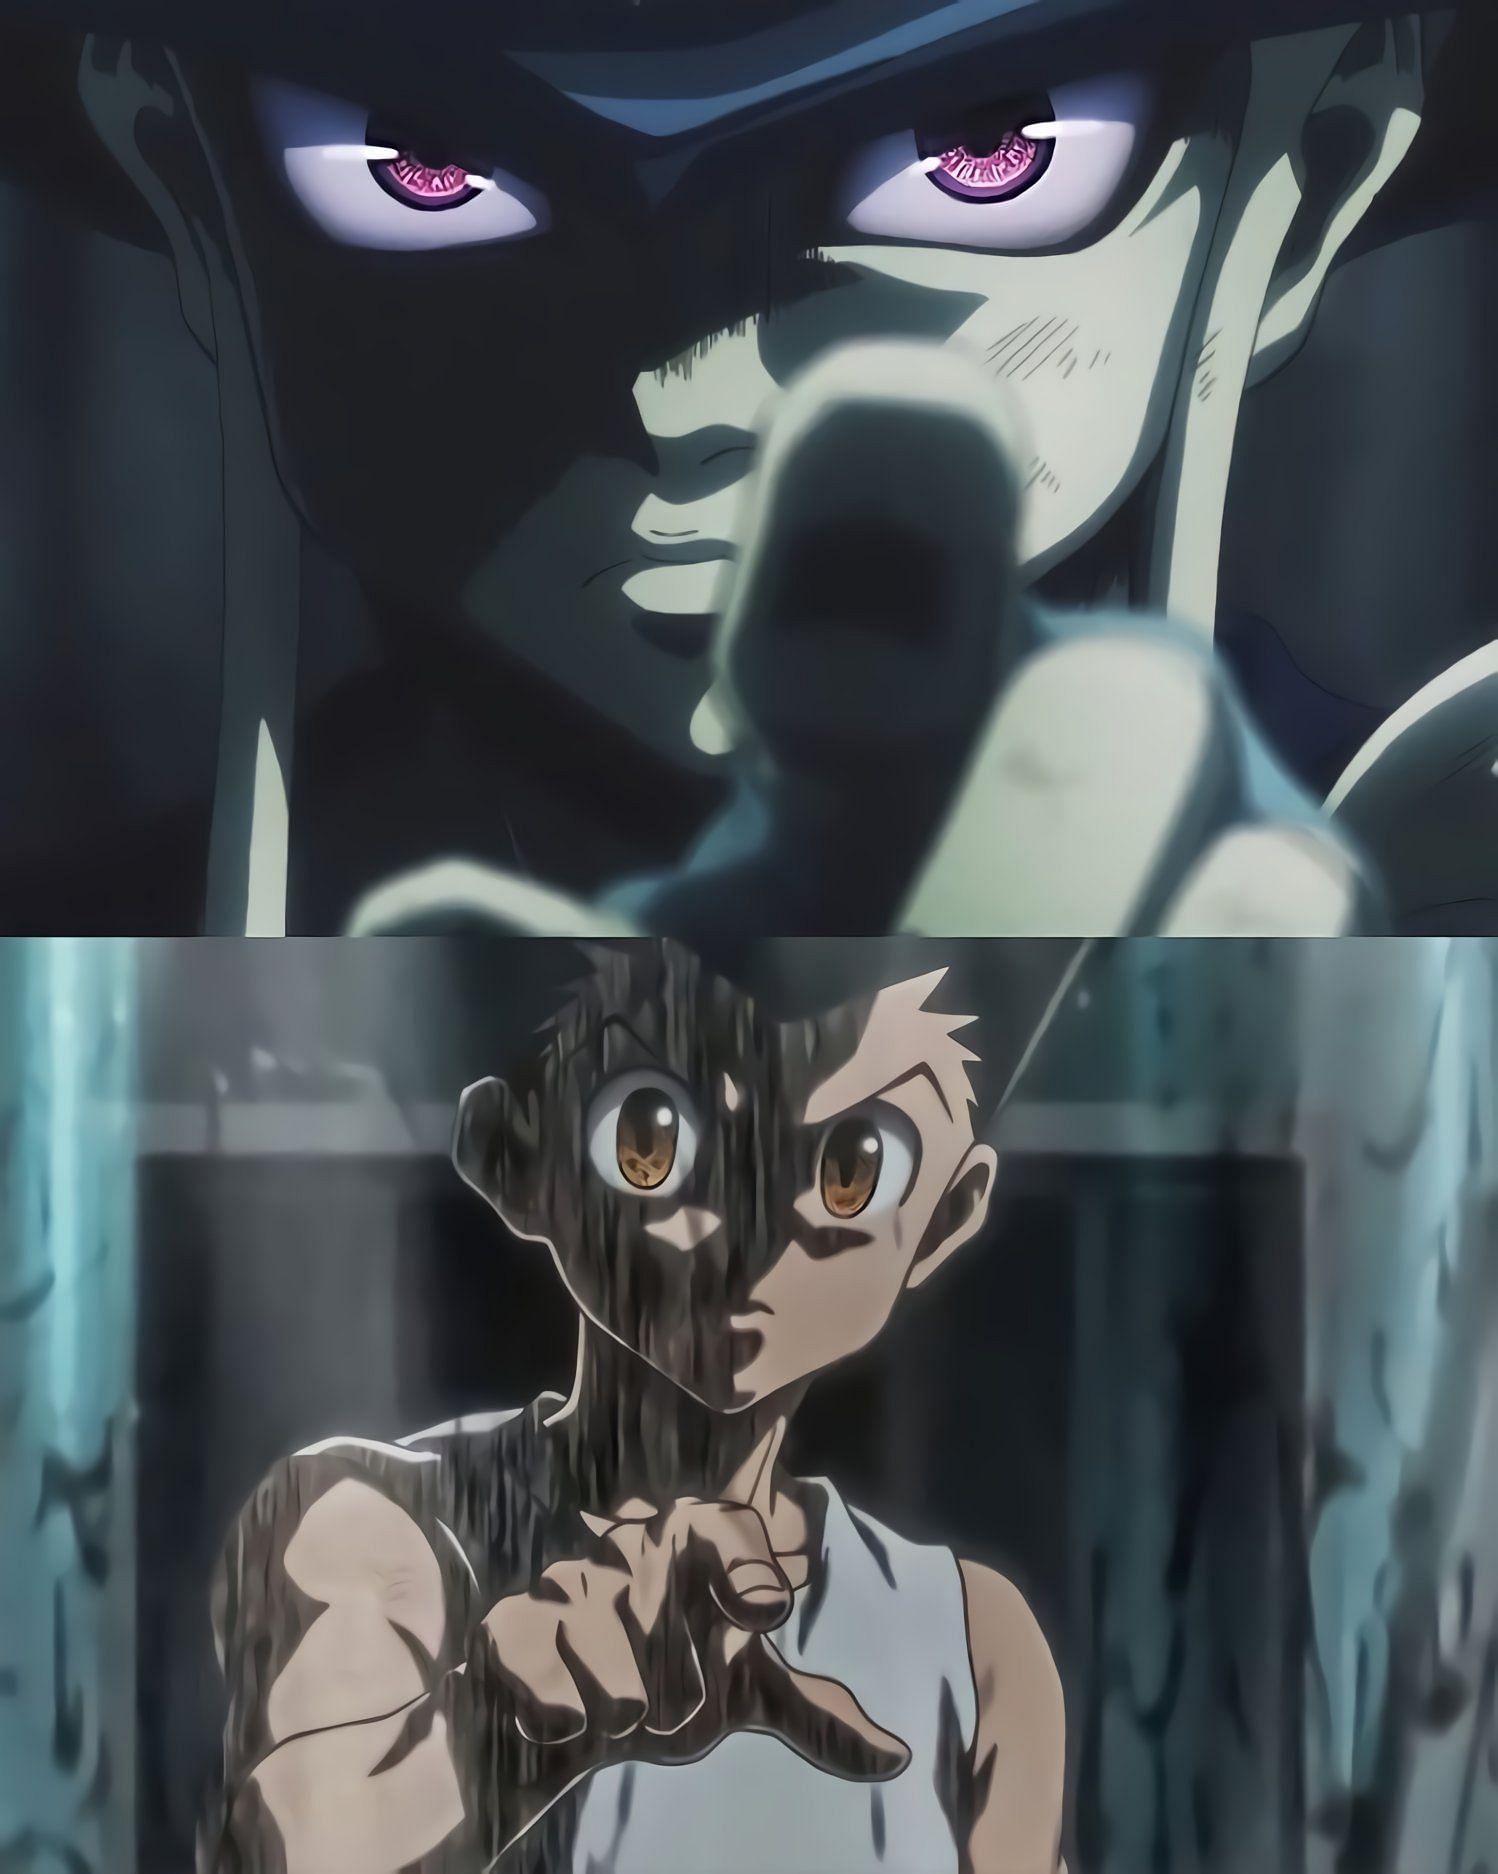 How to watch Hunter x Hunter in order